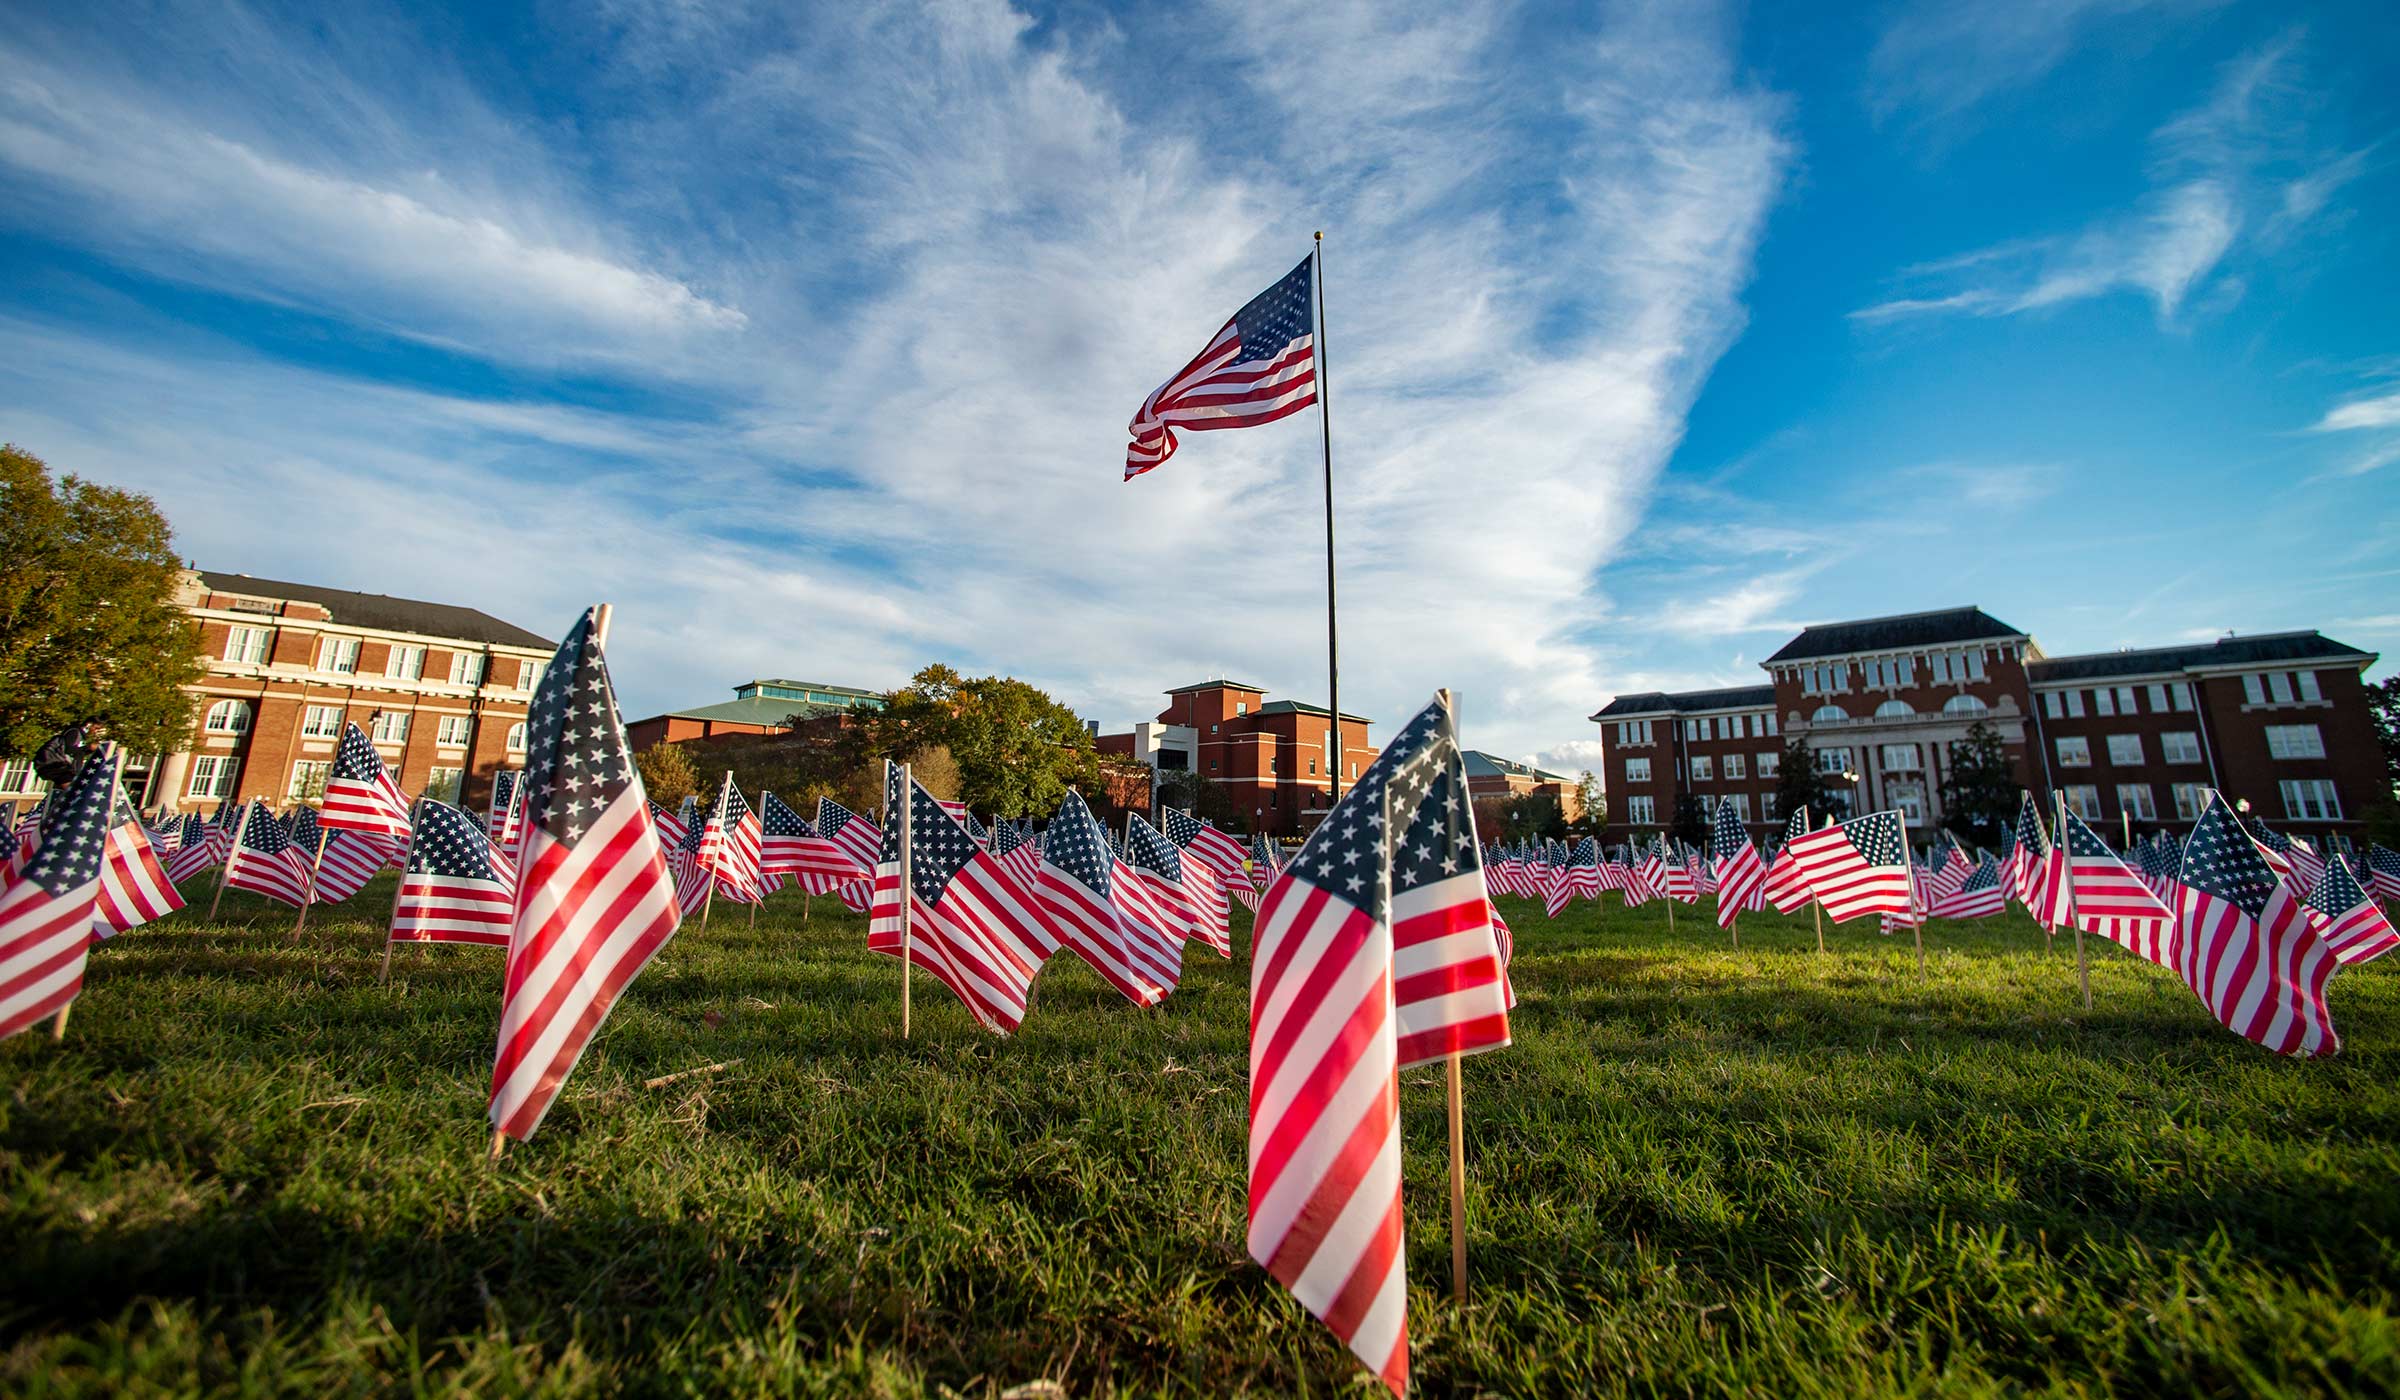 Large and small American flags on green grass with buildings in background